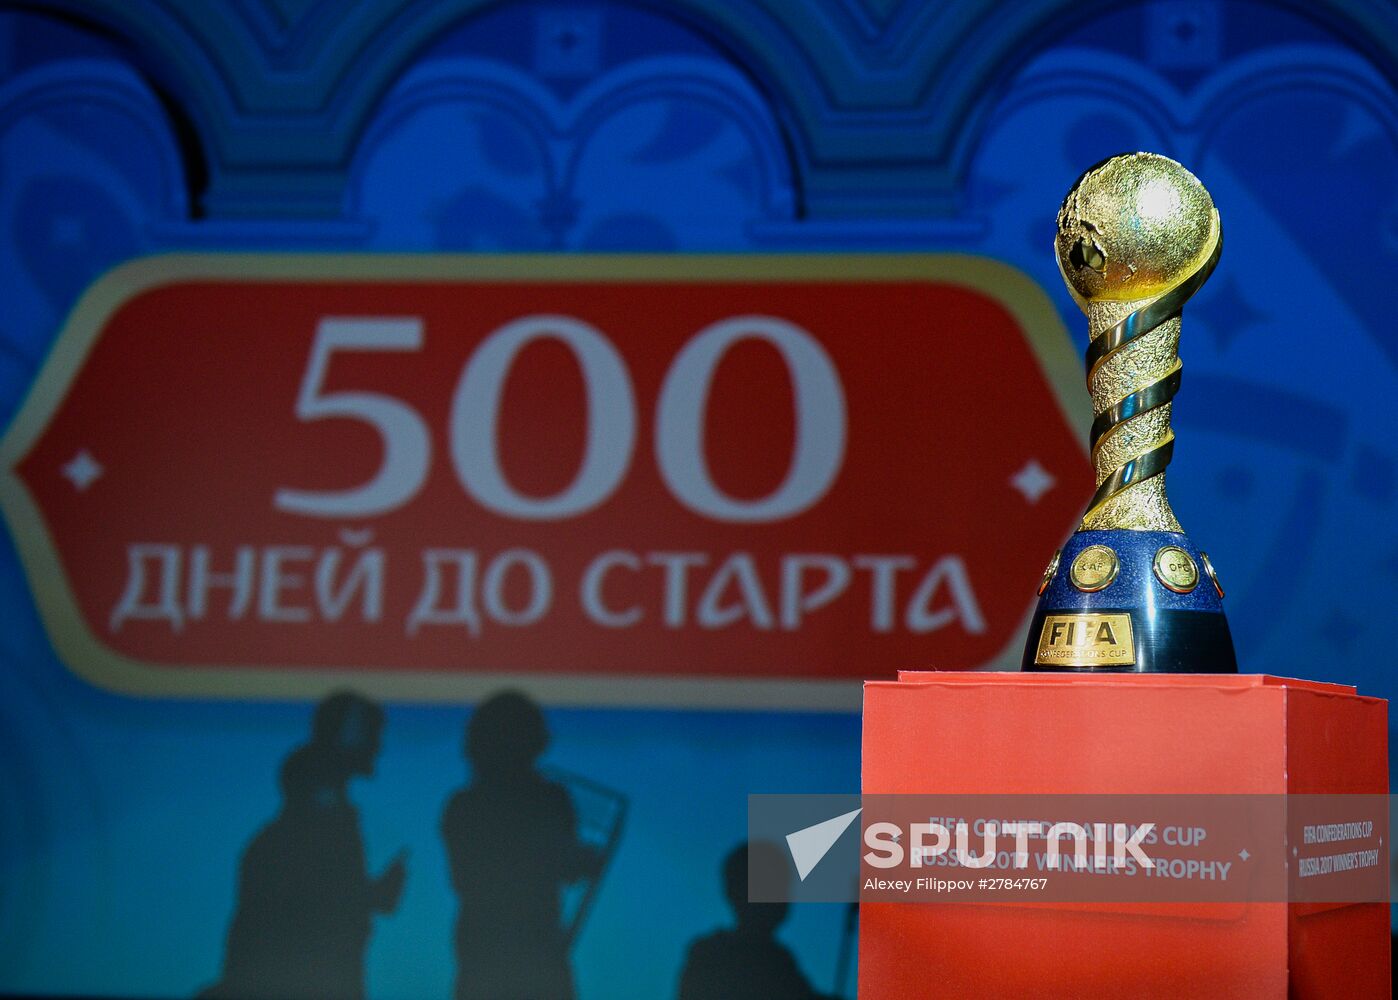 500 days countdown to 2017 FIFA Confederations Cup